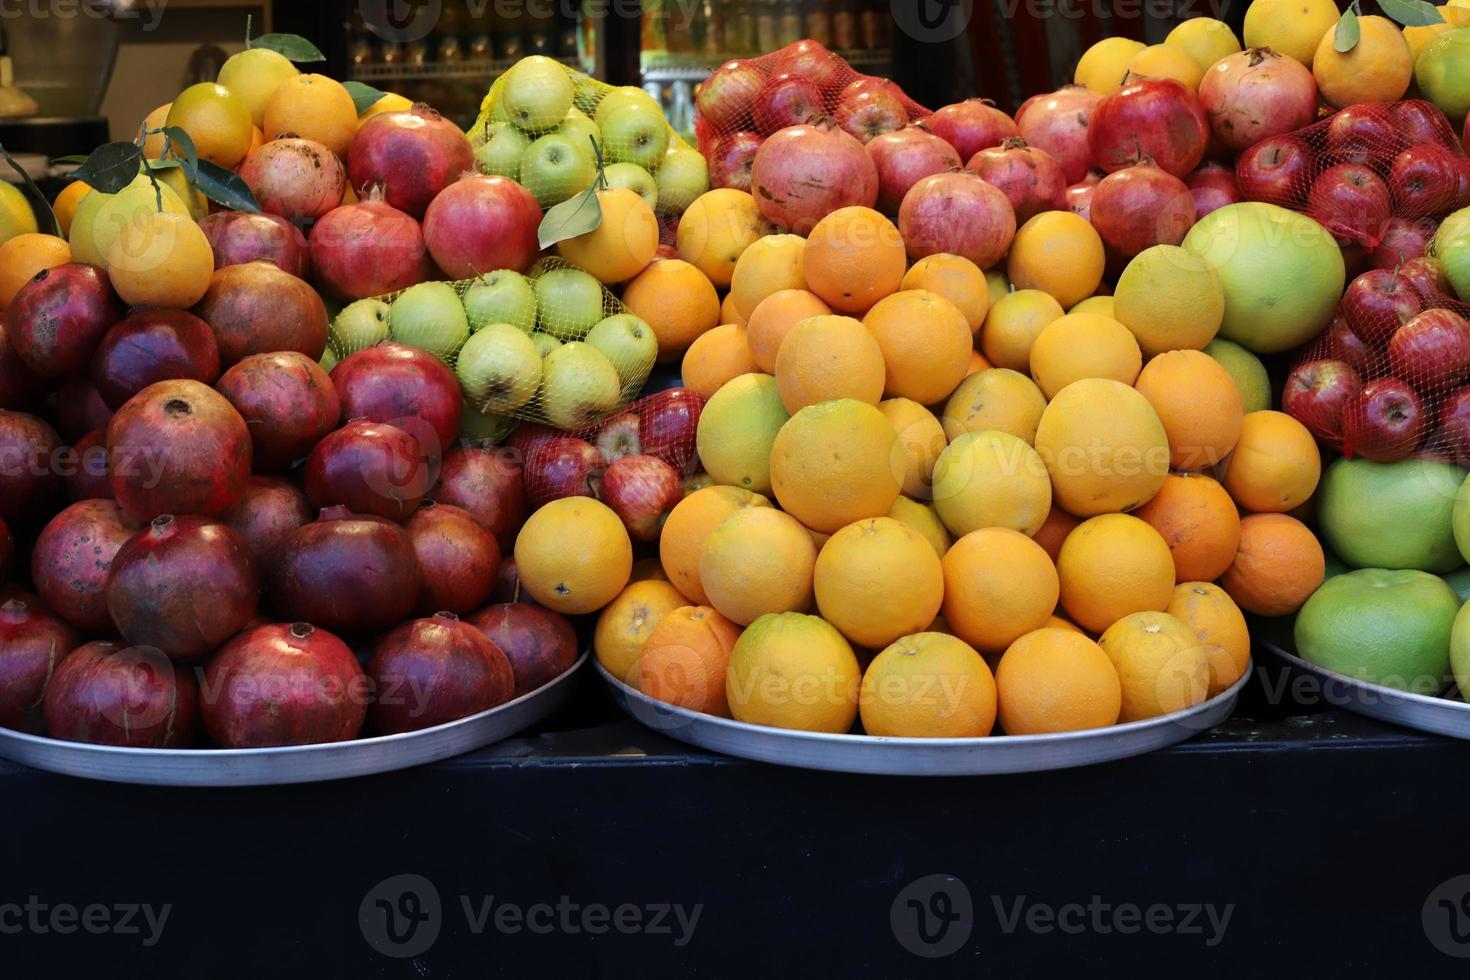 Fresh vegetables and fruits are sold at a bazaar in Israel. photo